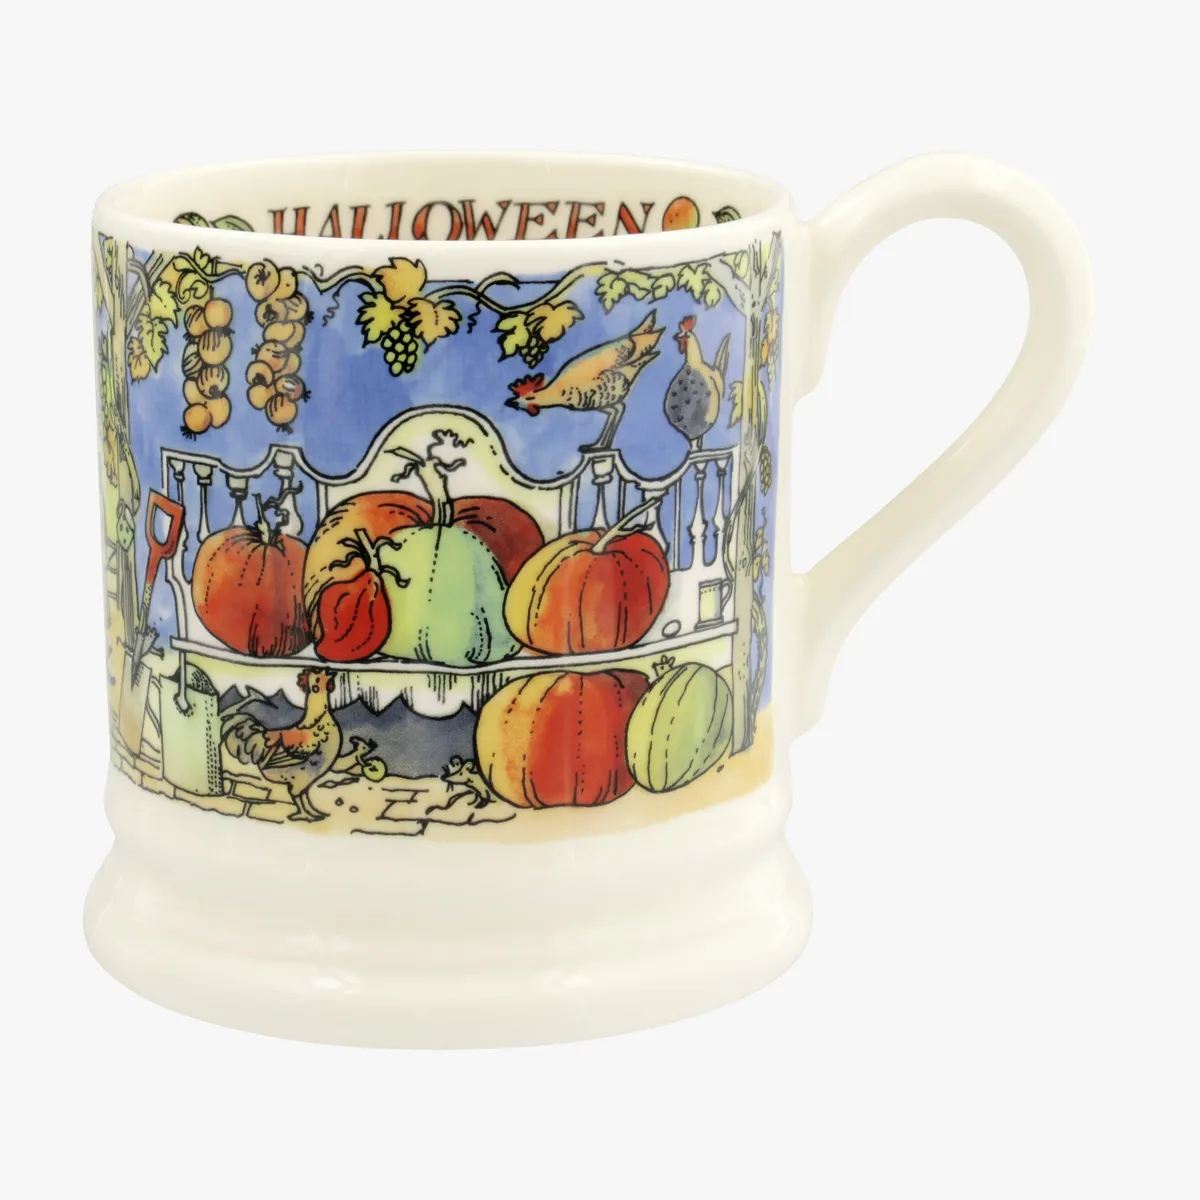 A midnight blue and white halloween mug from Emma Bridgewater featuring painted pumpkins